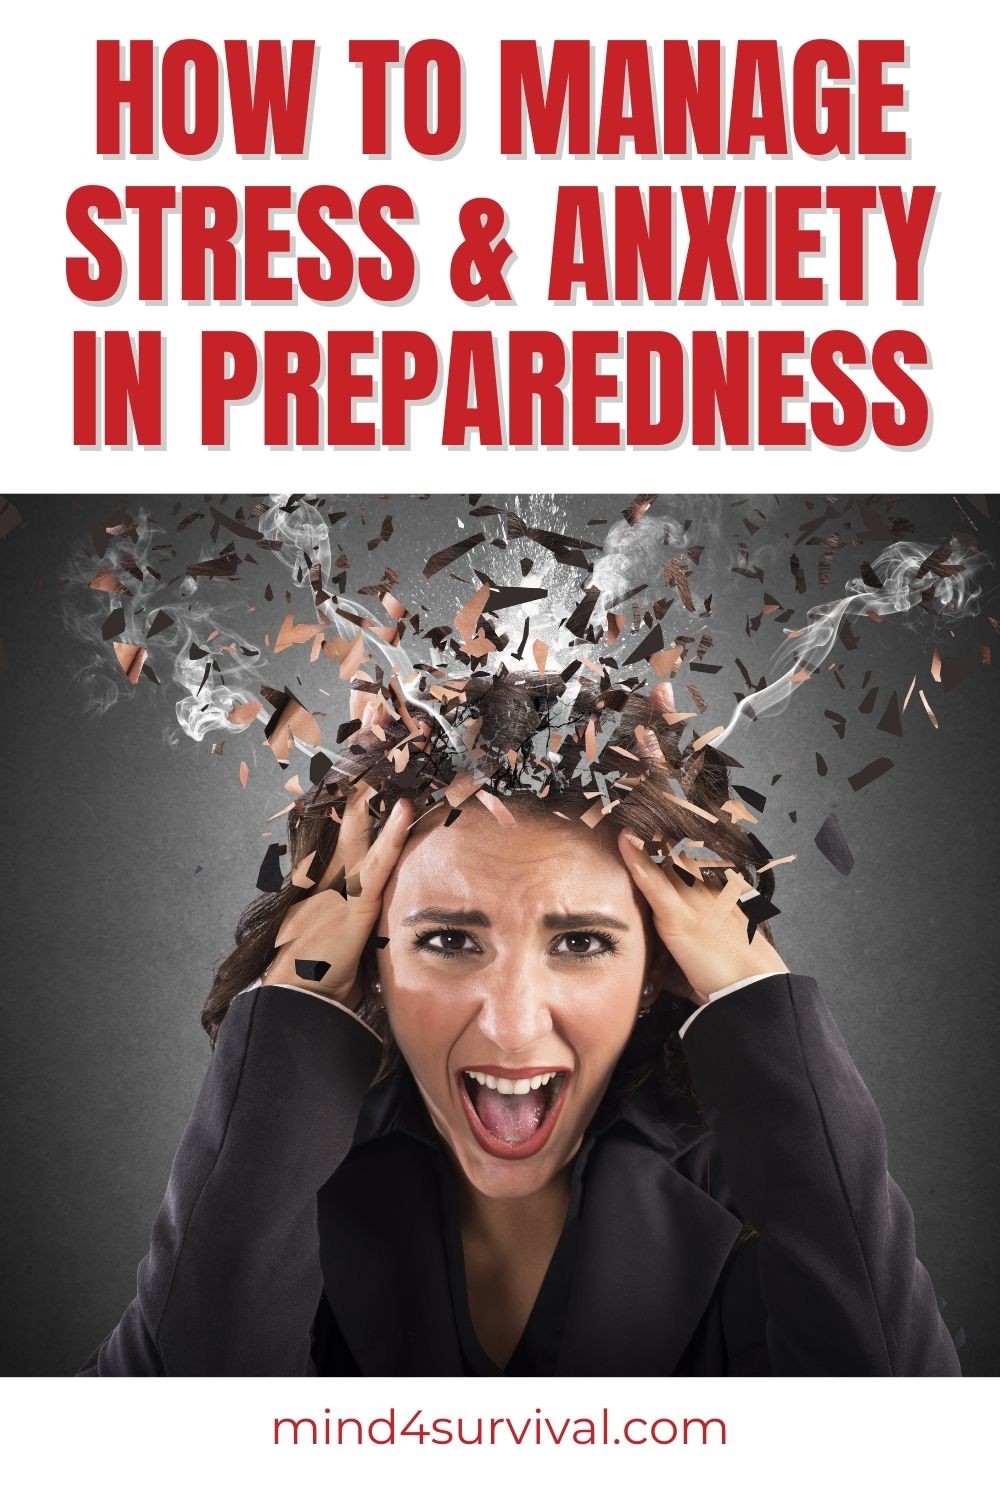 161: How to Manage Stress and Anxiety in Preparedness